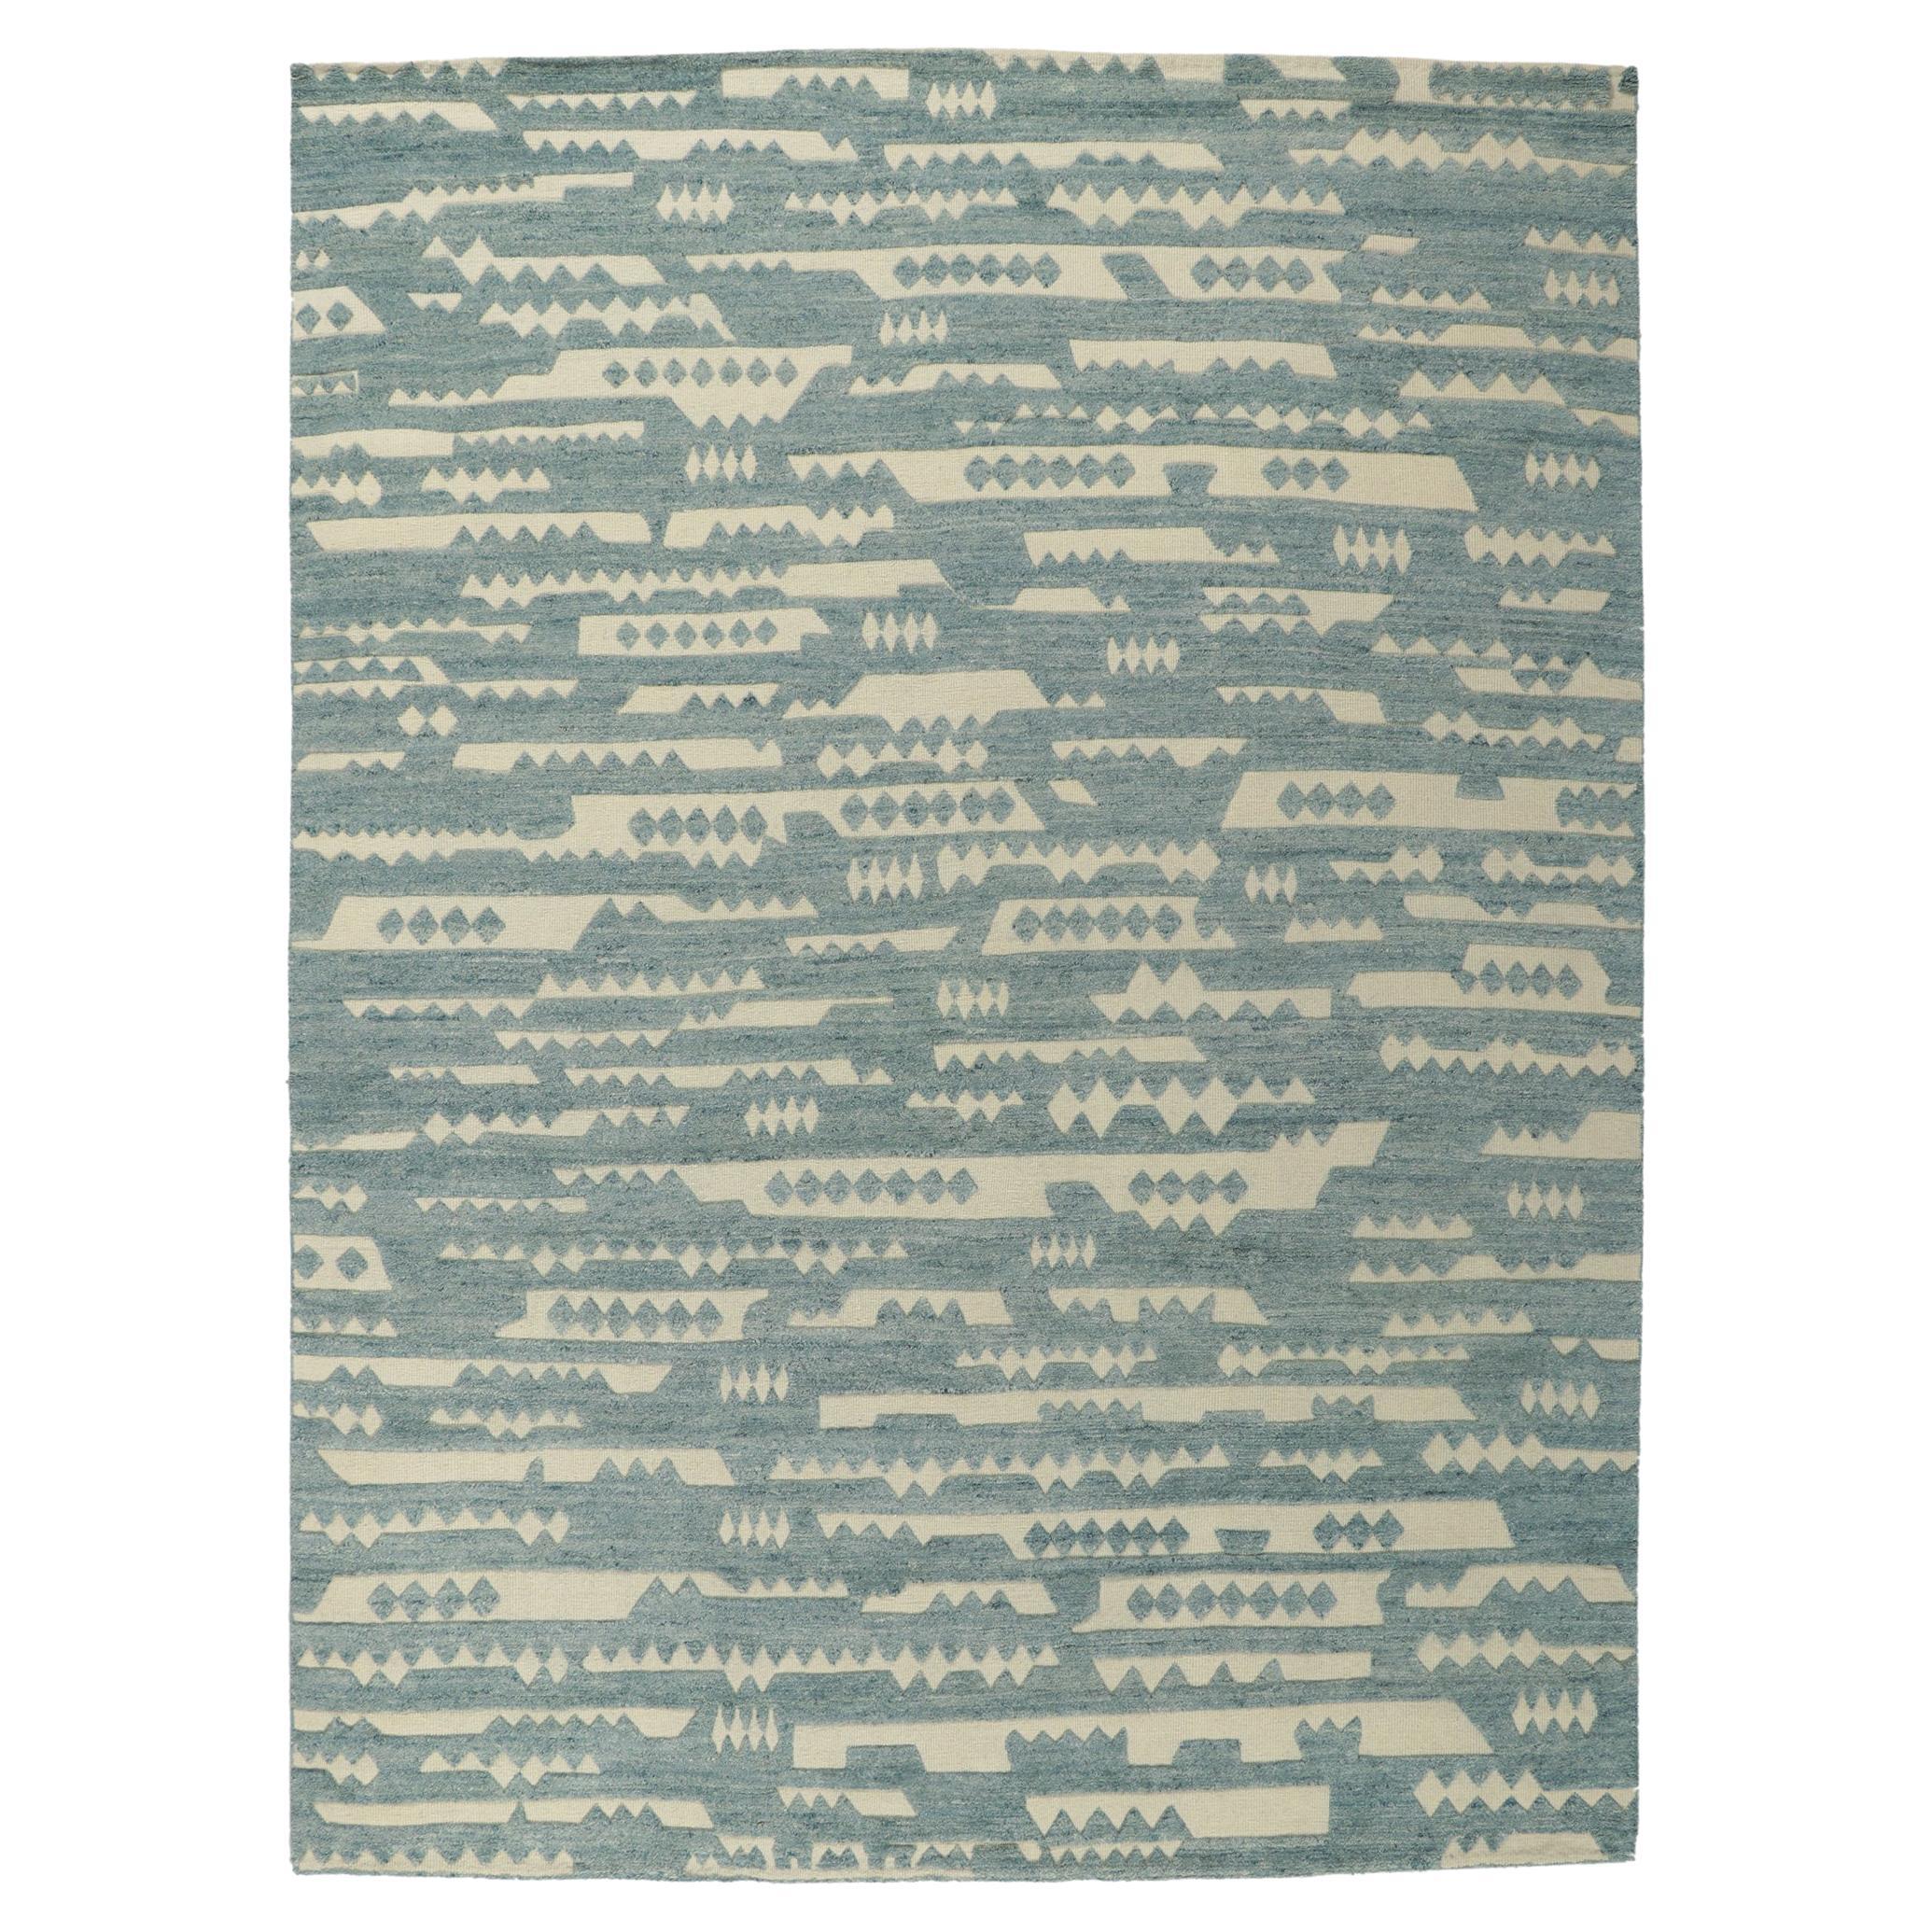 New Contemporary High-Low Textured Rug